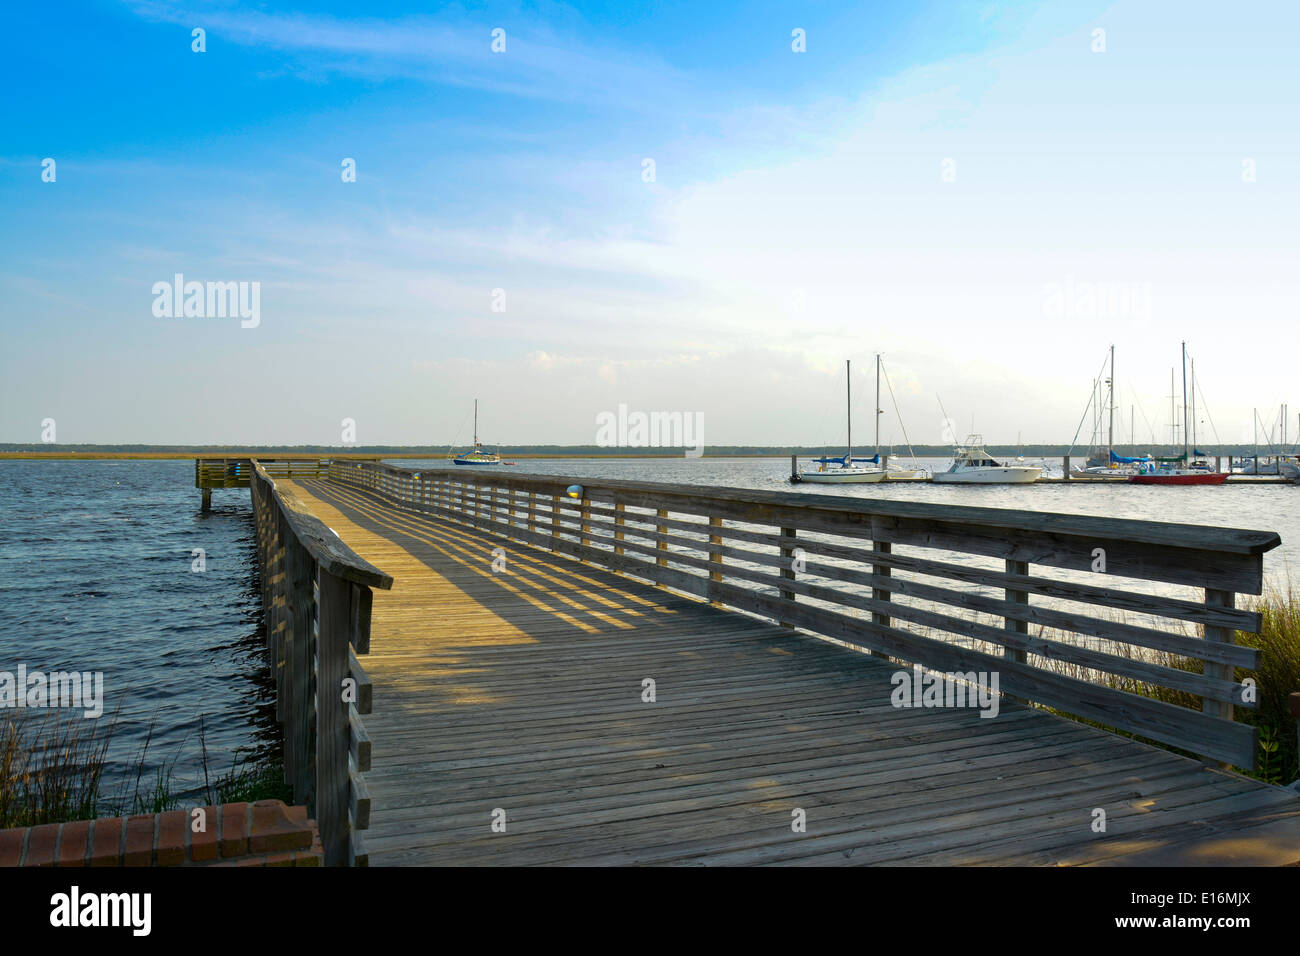 The wooden pier on St. Mary's River boat dock for the Cumberland Island National Seashore ferry excursions in St. Mary's, GA Stock Photo